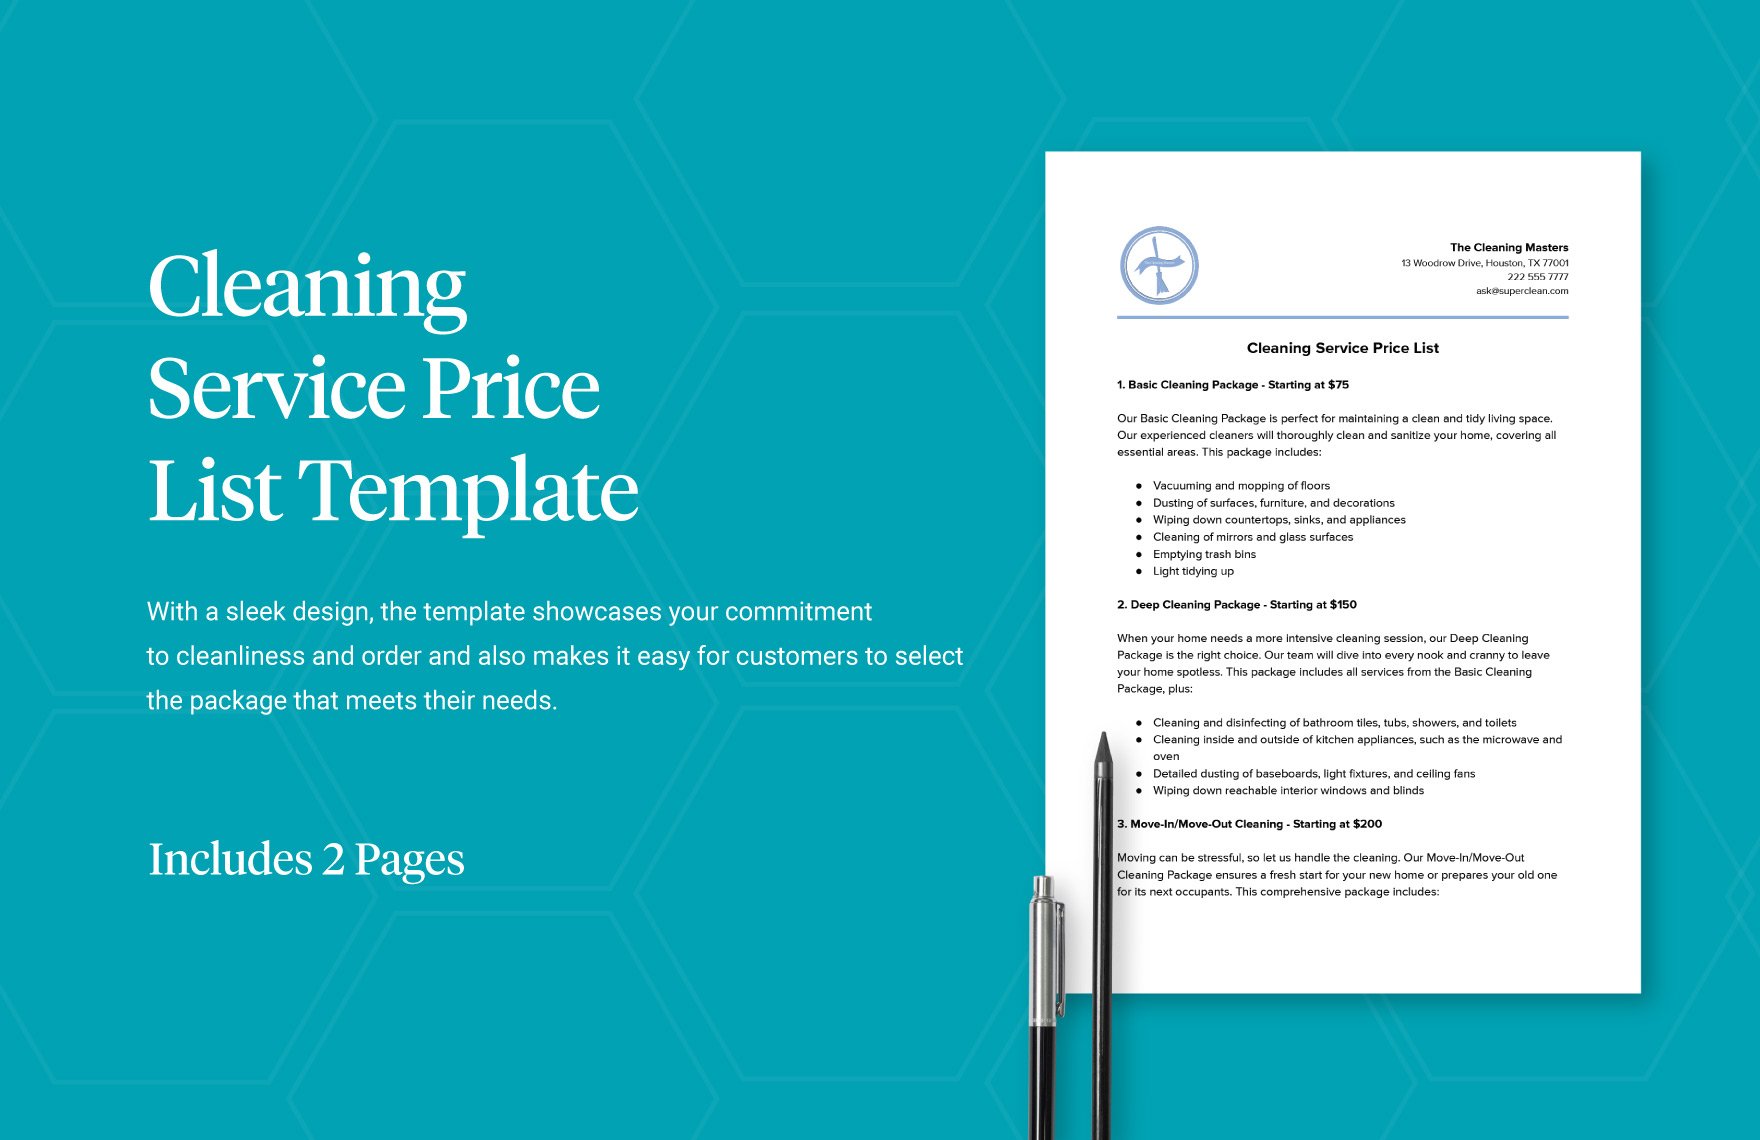 Cleaning Service Price List Template